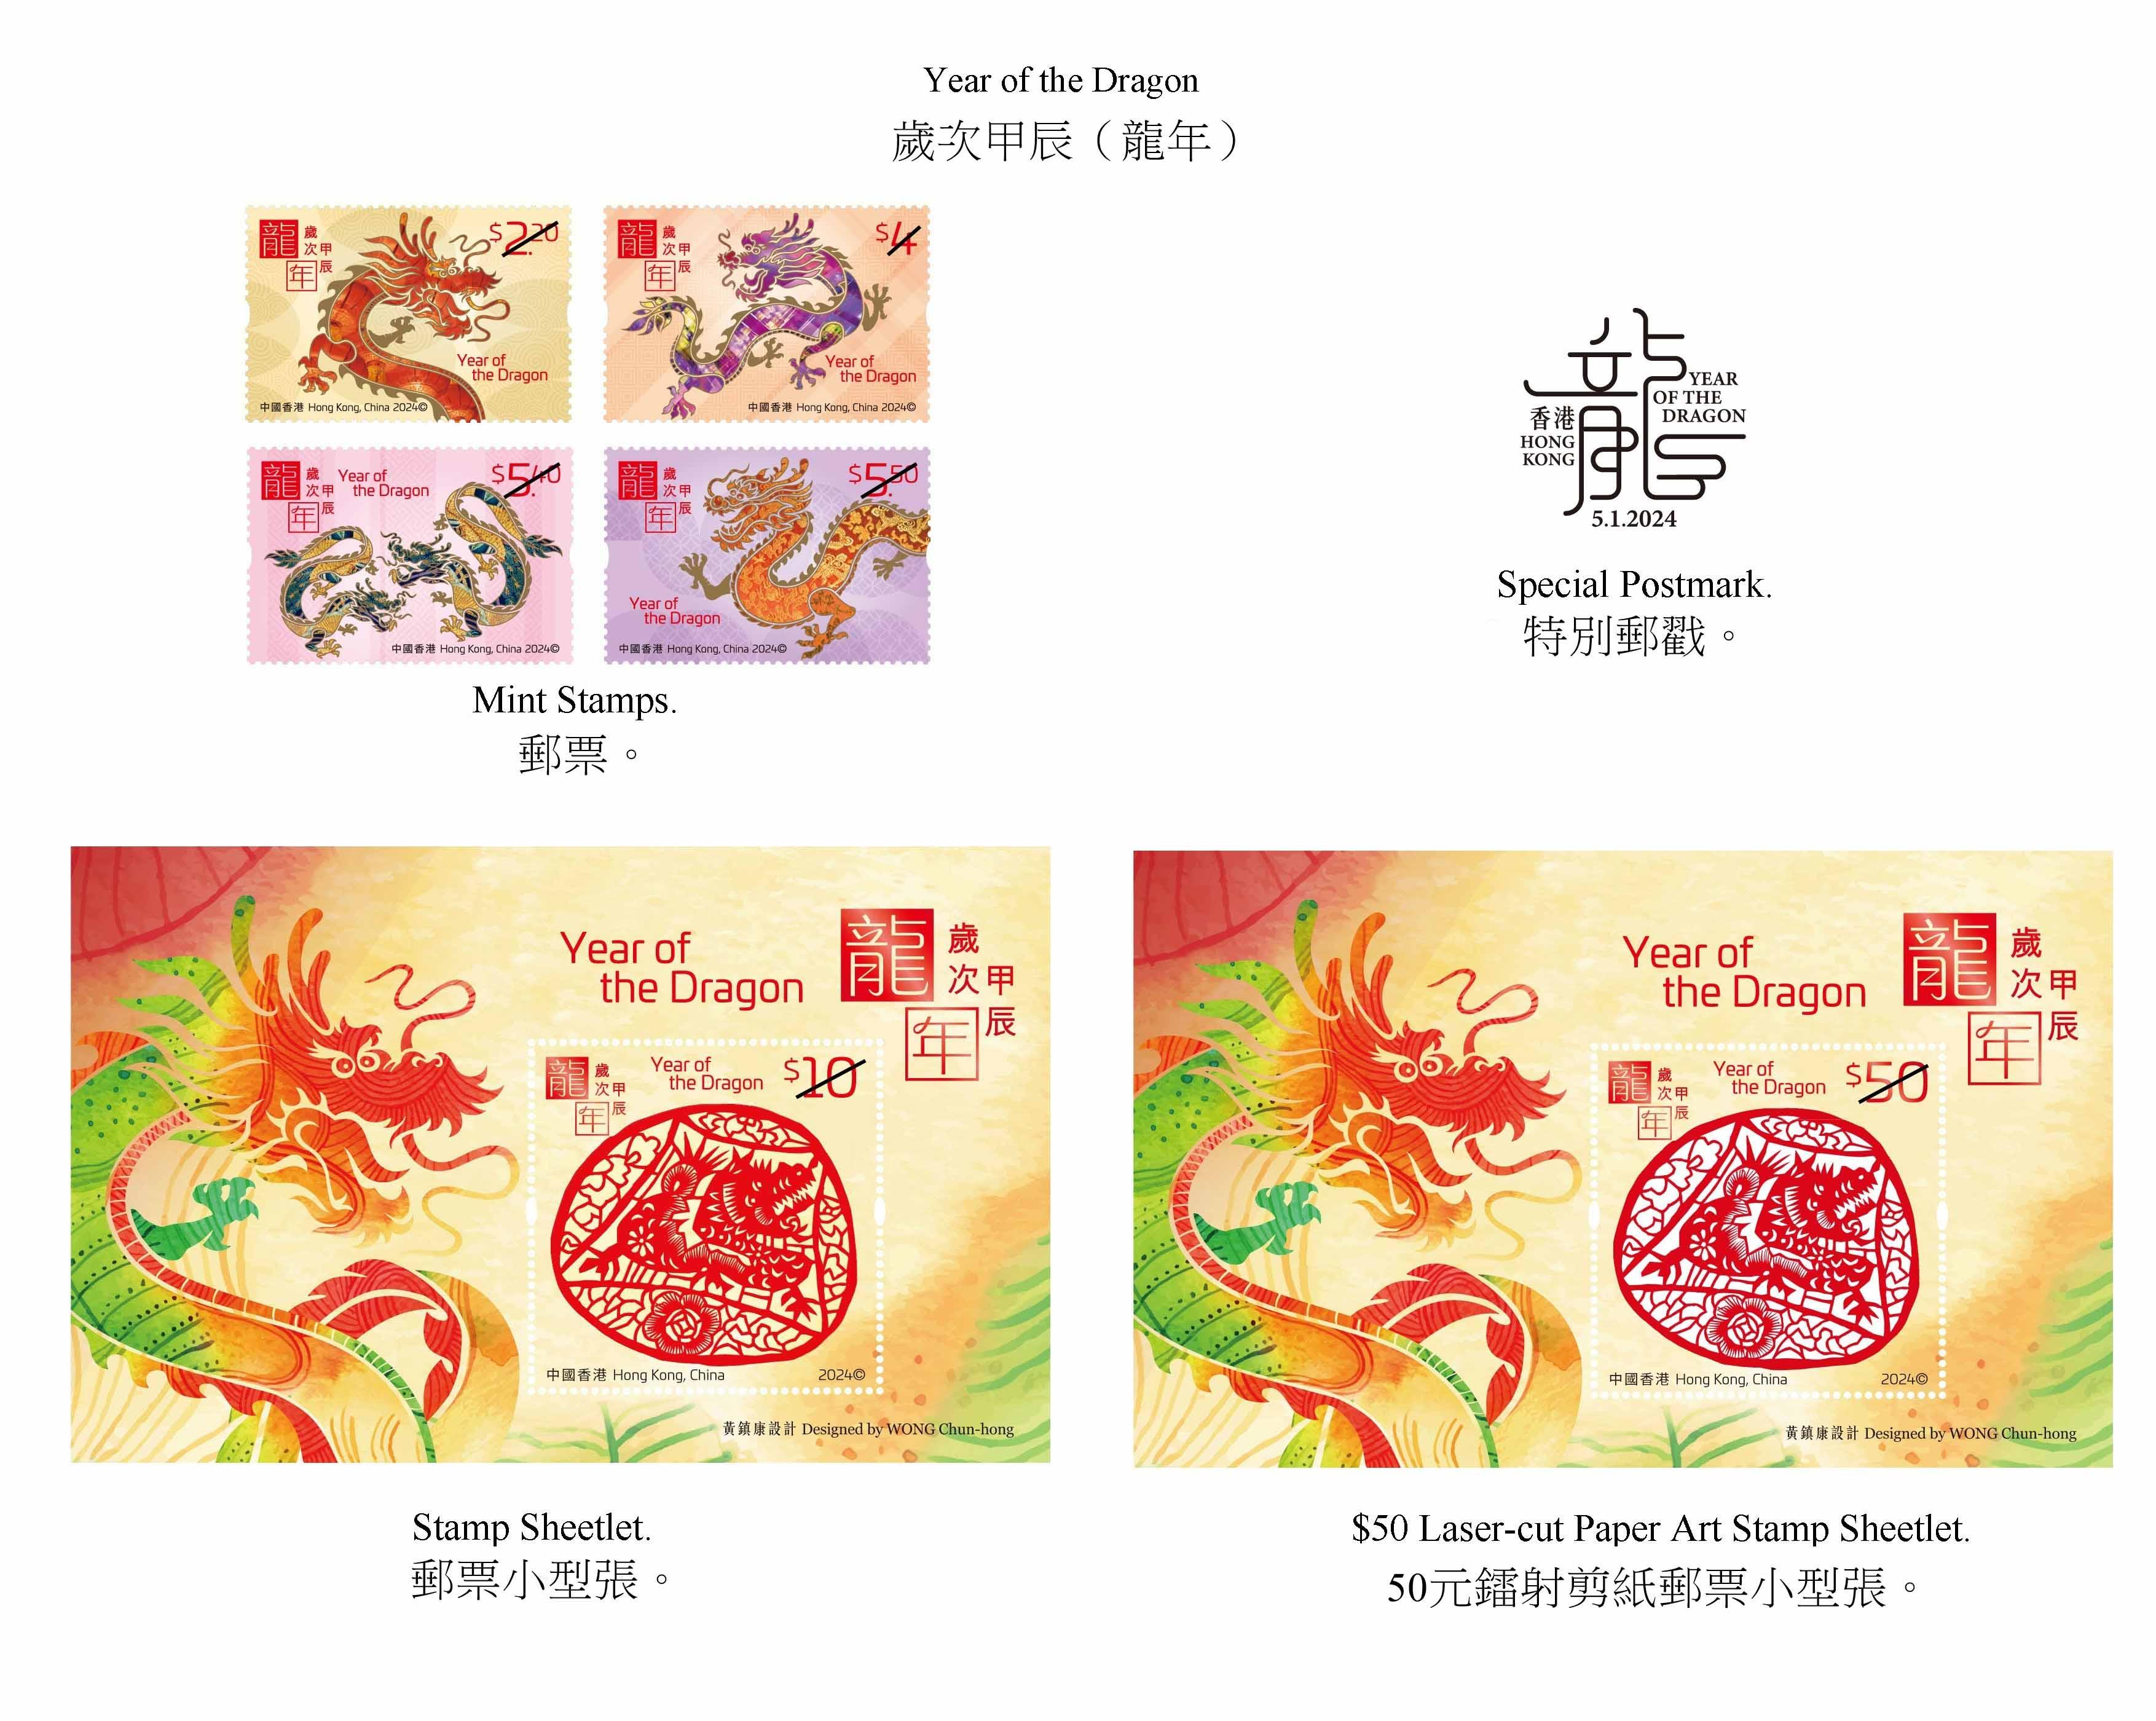 Hongkong Post will launch a special stamp issue and associated philatelic products on the theme of "Year of the Dragon" on January 5, 2024 (Friday). Photos show the mint stamps, the stamp sheetlets and the special postmark.
